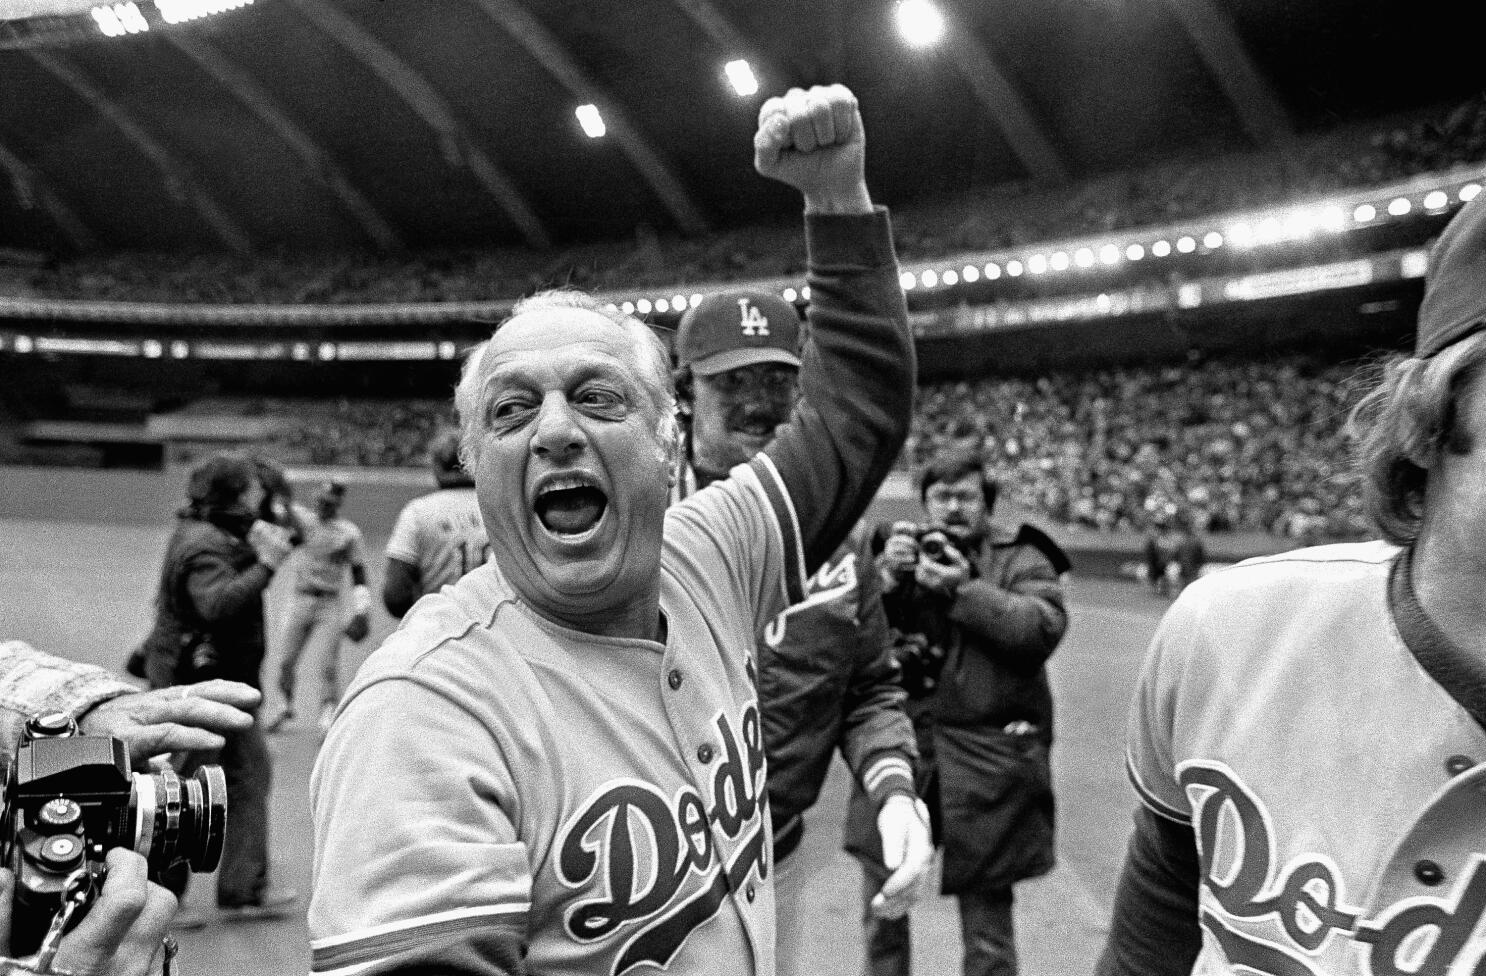 Legendary Dodgers manager Tommy Lasorda dead at age 93 - Los Angeles Times